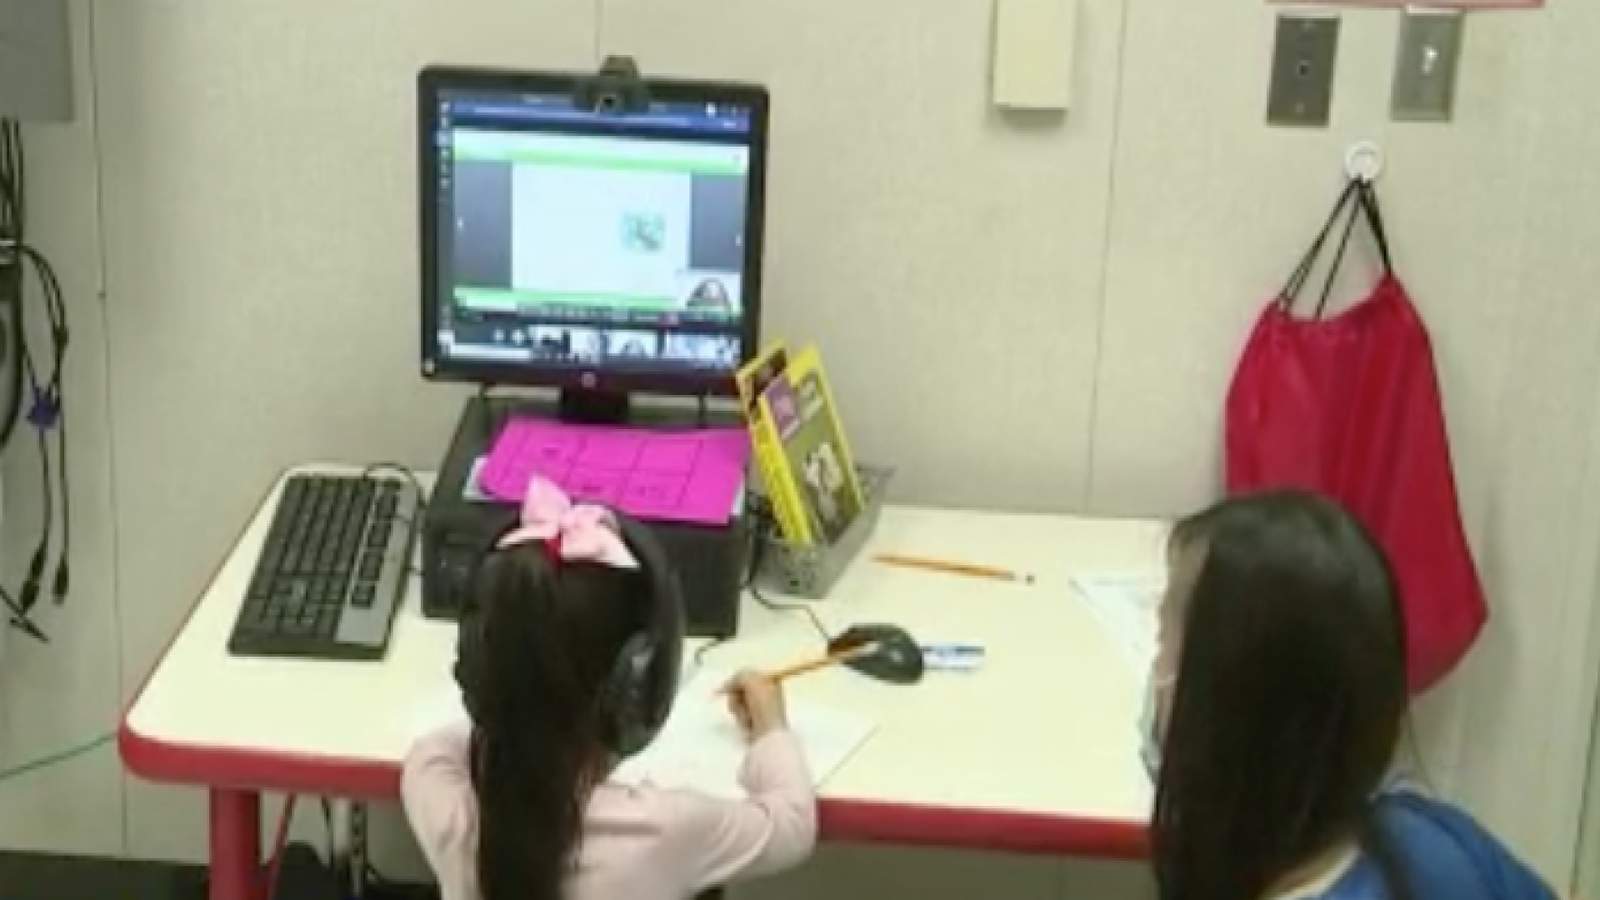 HISD considers extending virtual learning period for all students